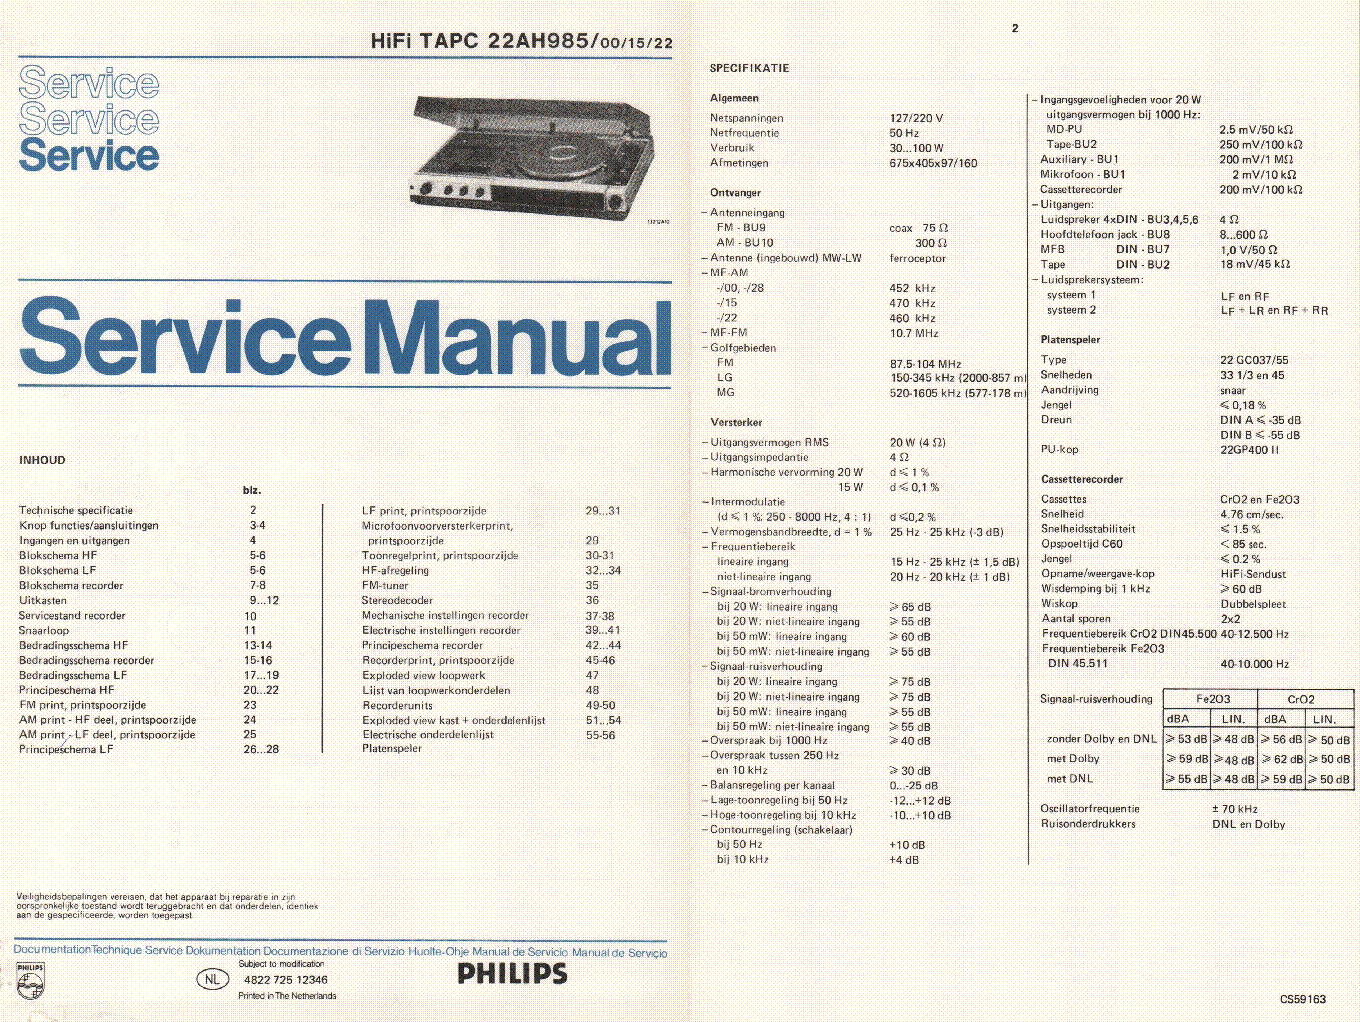 PHILIPS 22AH985 service manual (1st page)